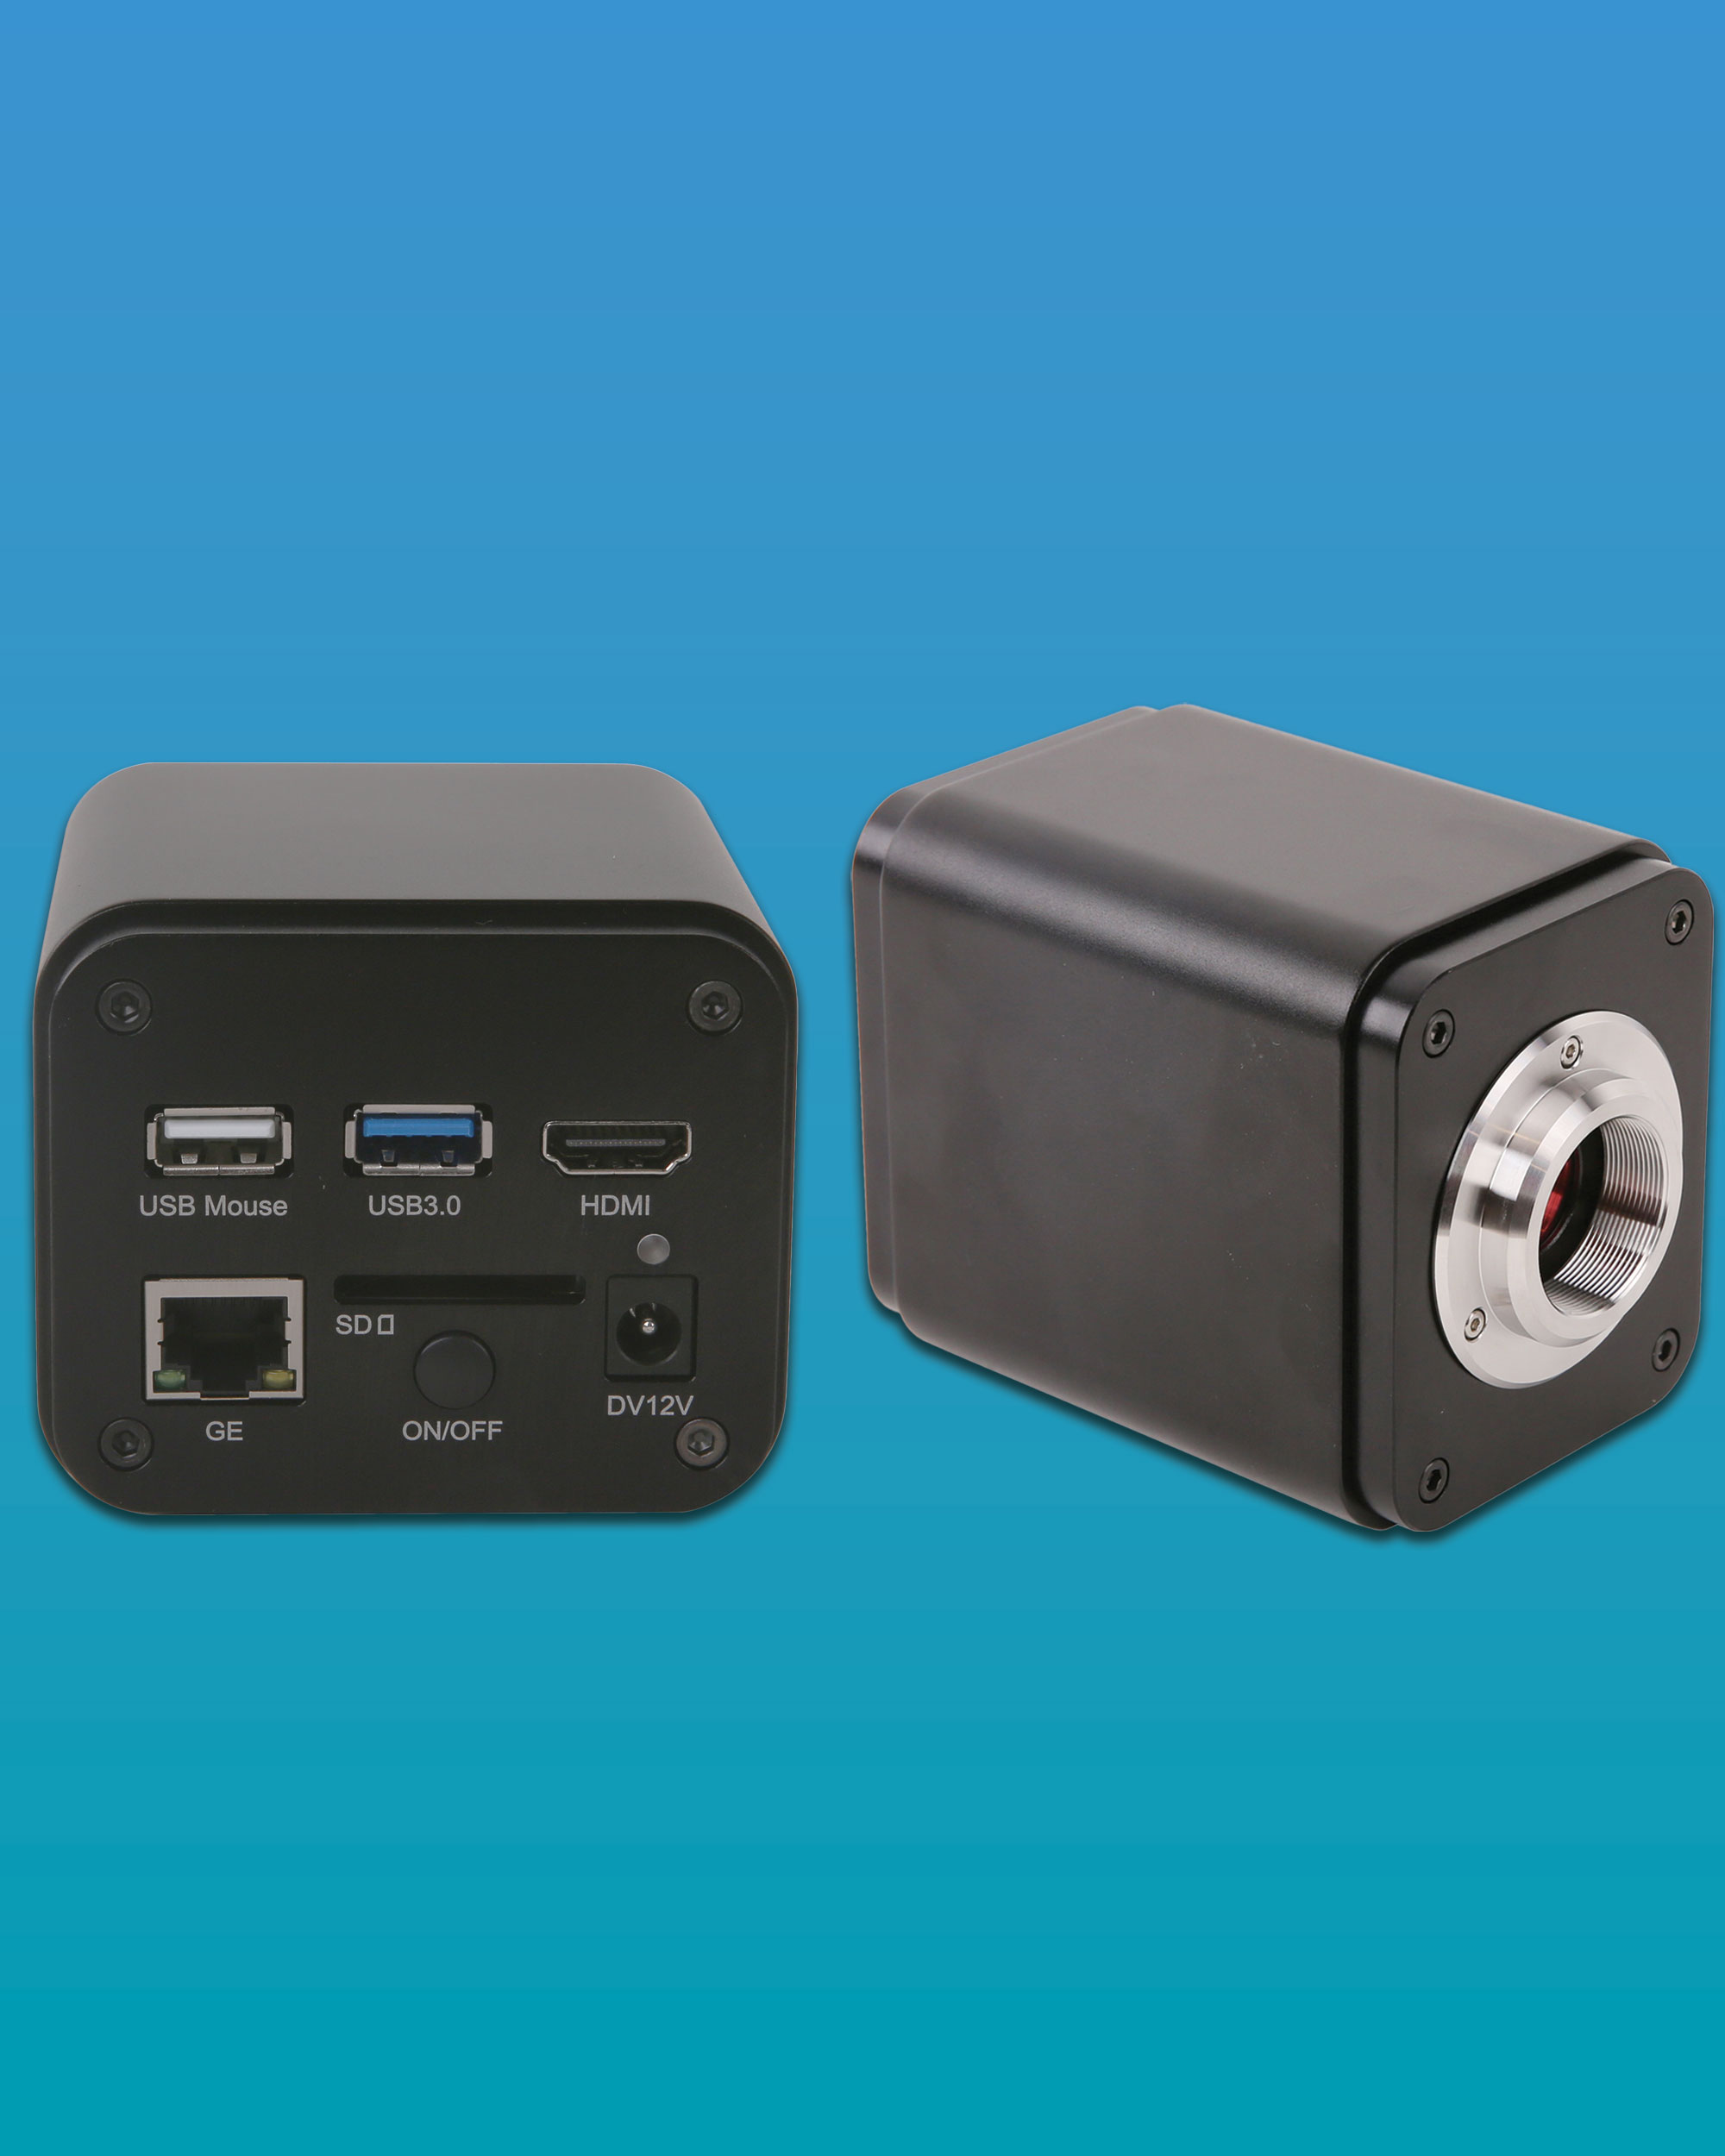 LC-31 HDMI/GigE/WiFi Multi-outputs C-mount CMOS Camera with High Sensitivity and Low Dark Current (Compatible with Leica and Zeiss Microscopes)